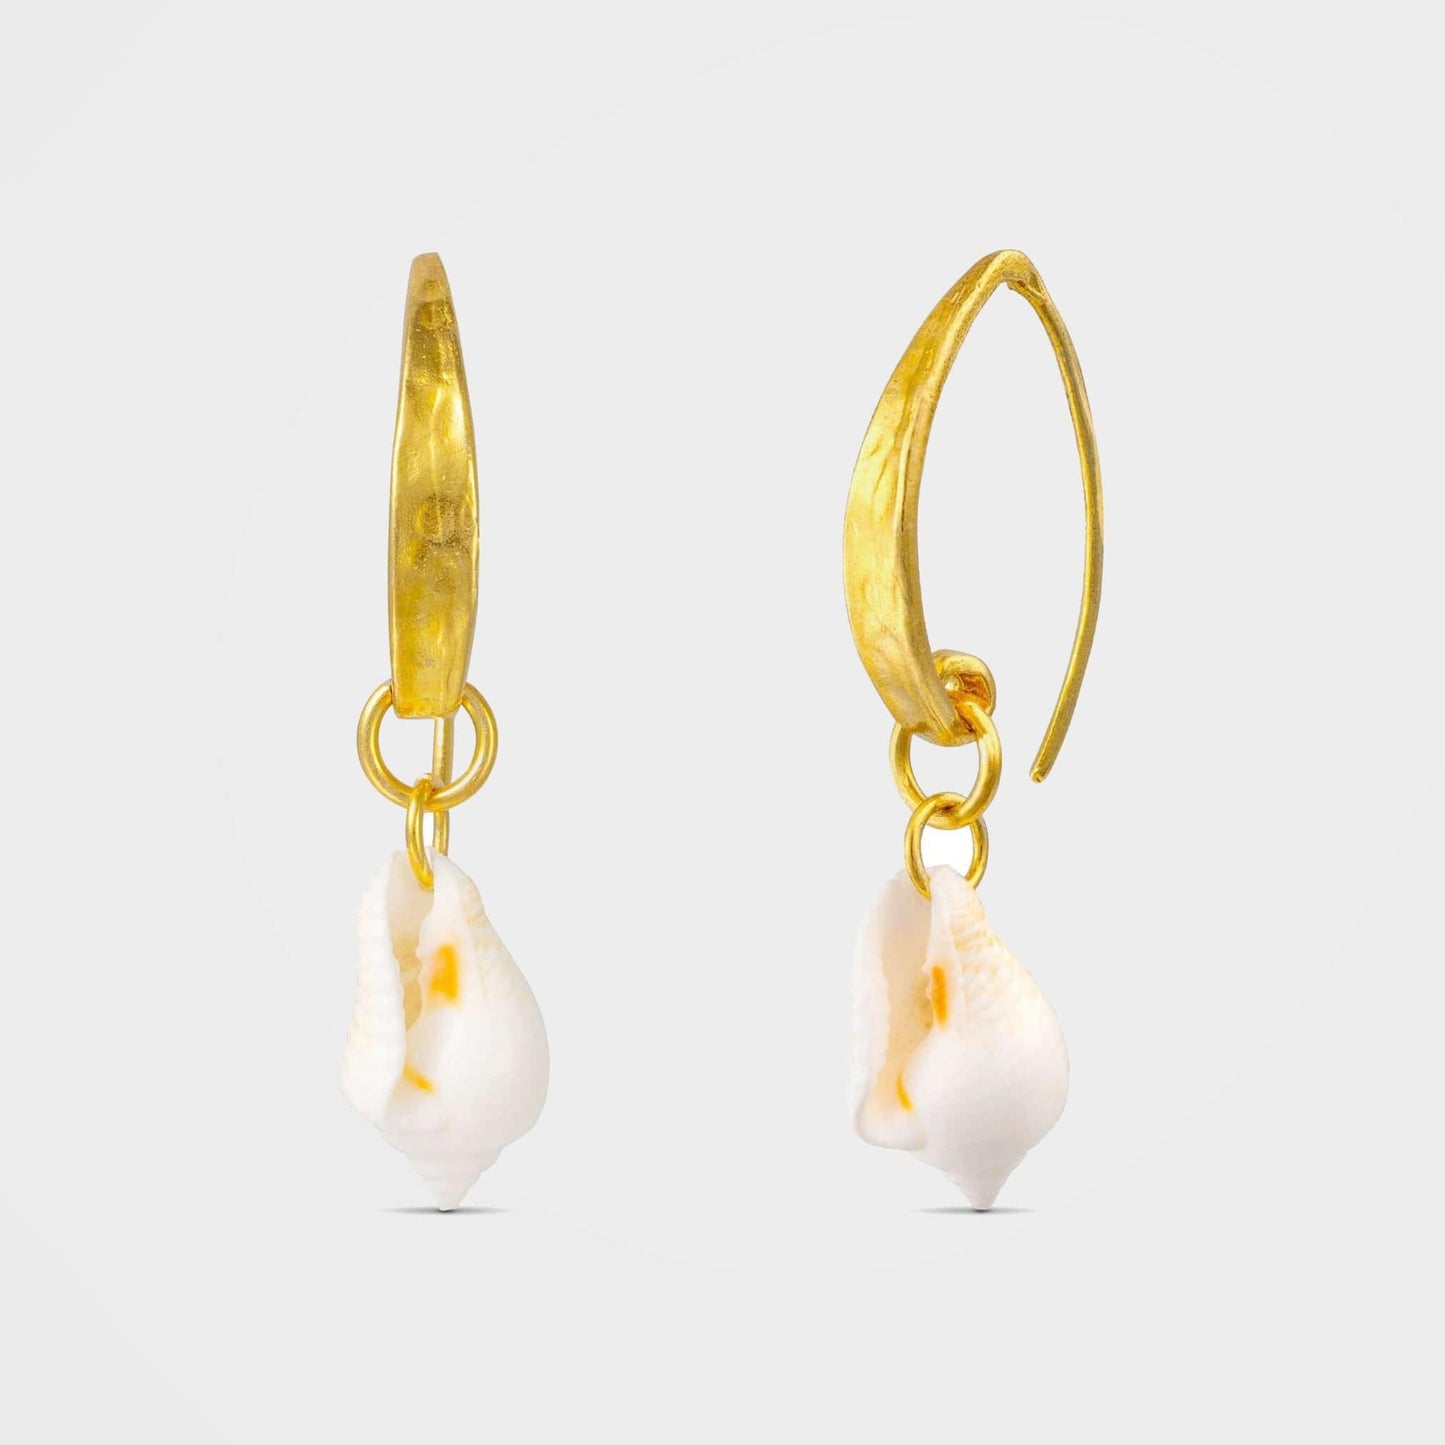 Gold or Silver White Shell Earrings, Concha | By Lunar James